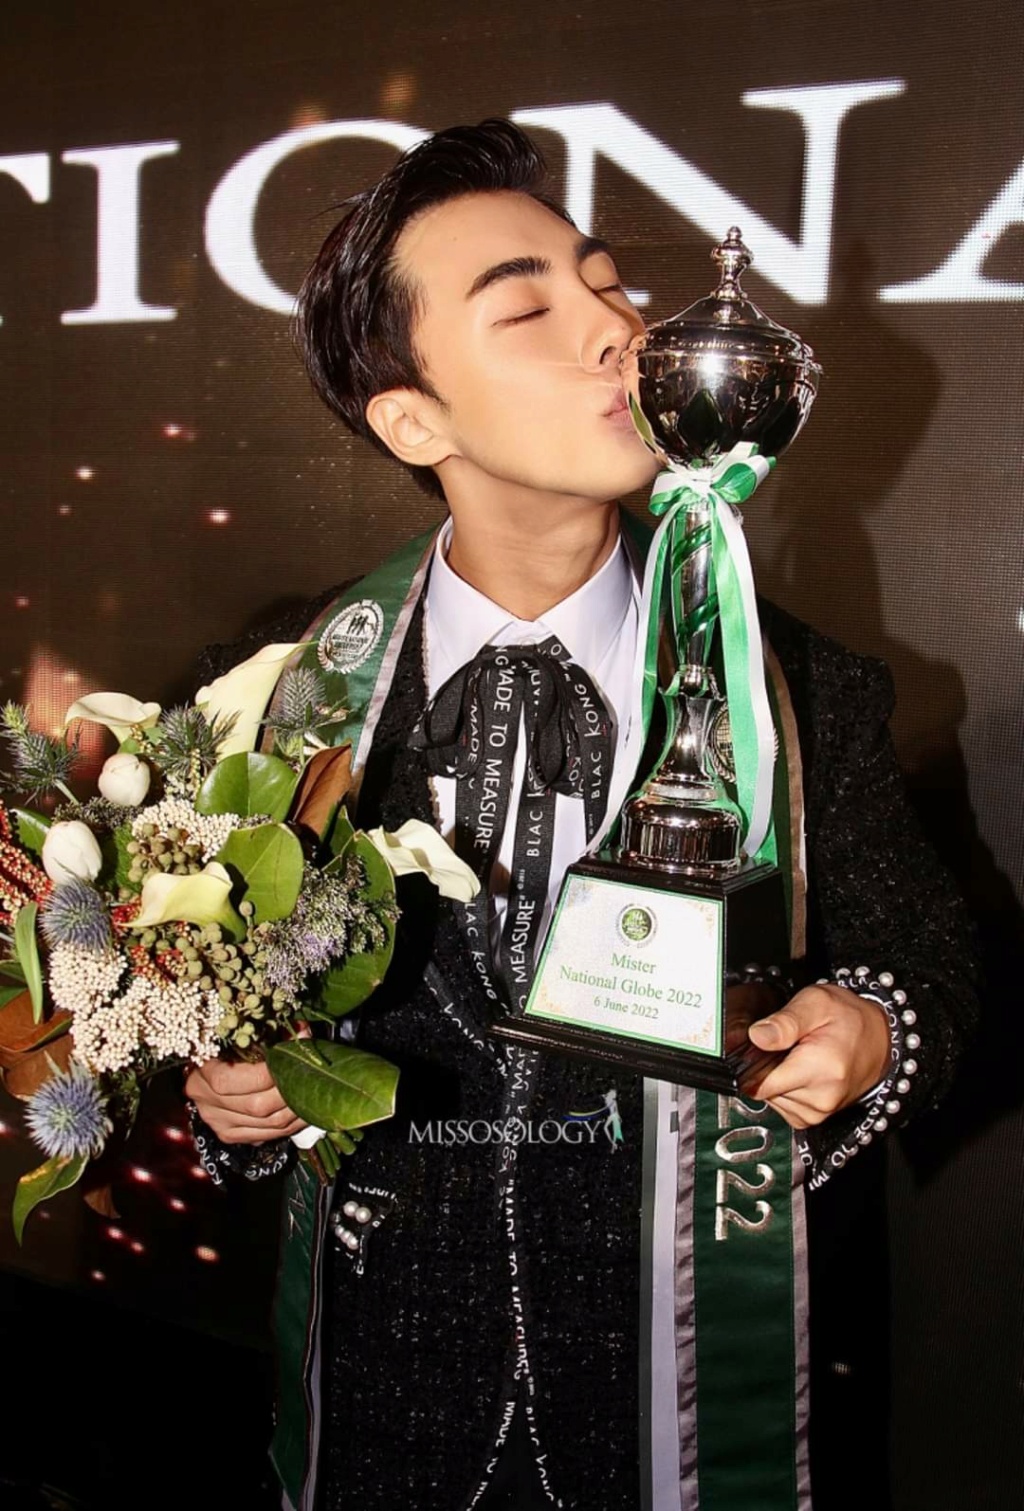 Mister National Universe 2022 is Việt Hoàng from Vietnam - Page 4 Fb_im960